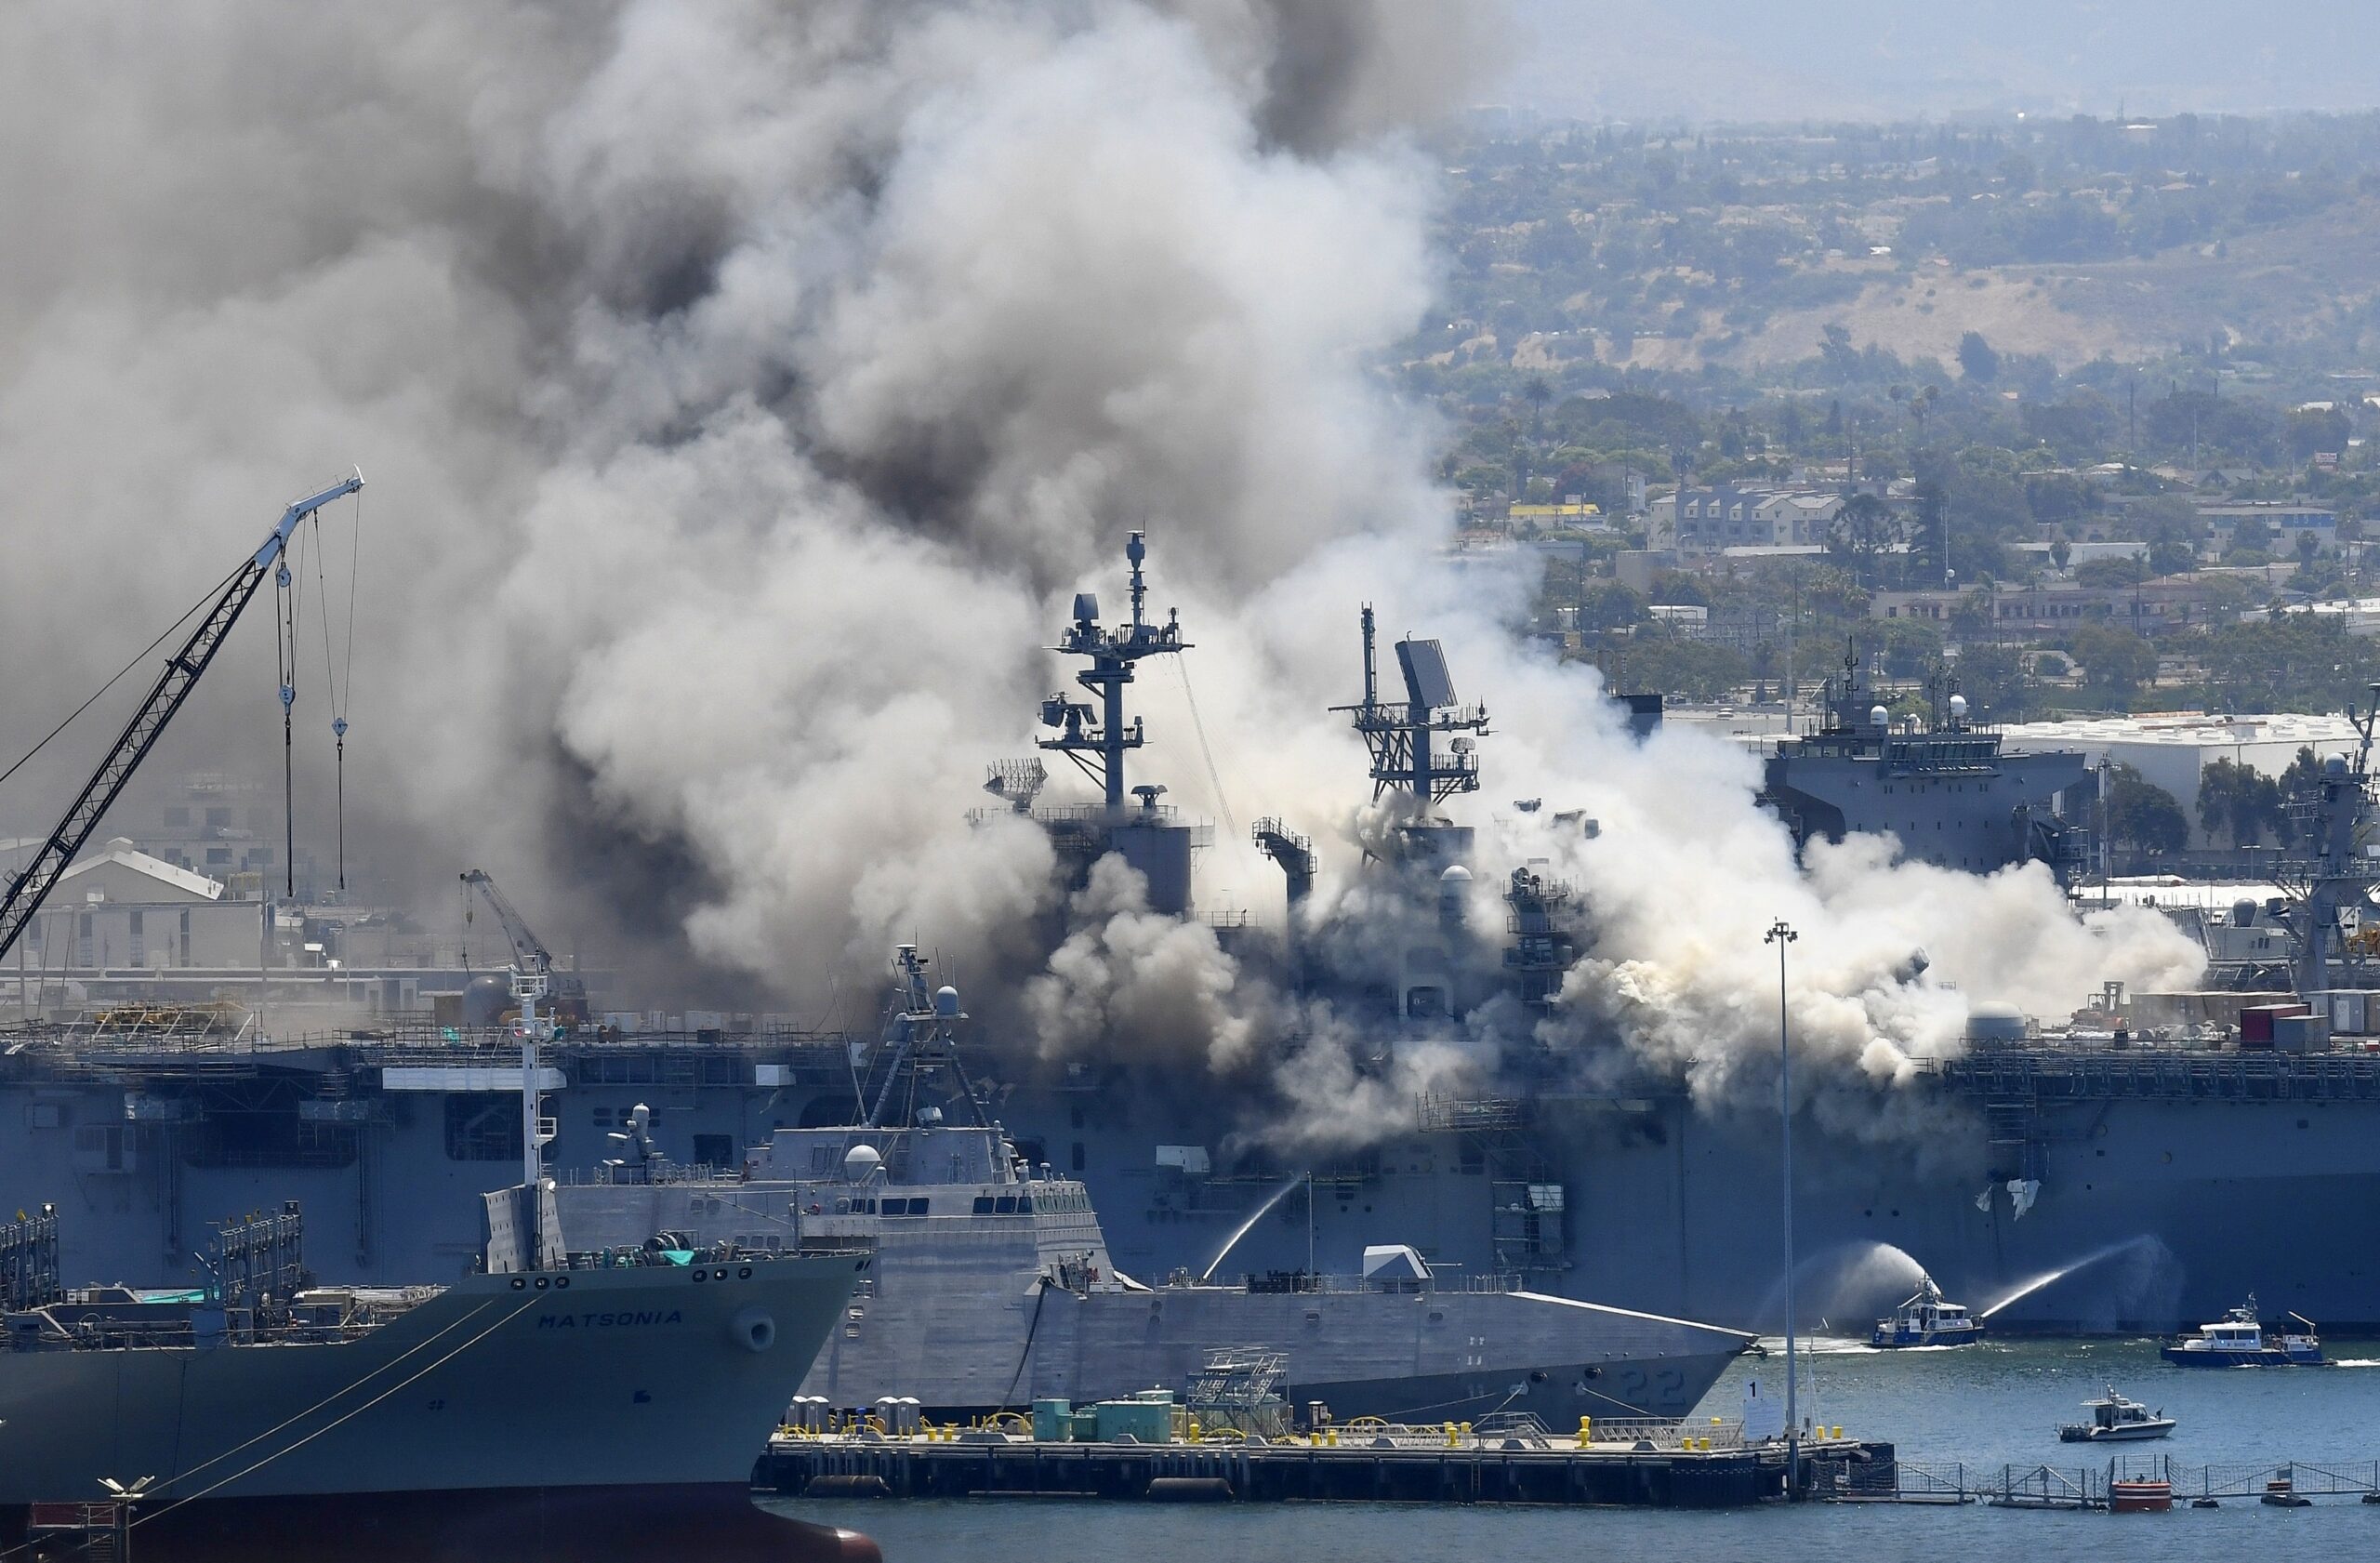 FILE - In this July 12, 2020, file photo, smoke rises from the USS Bonhomme Richard at Naval Base San Diego in San Diego, after an explosion and fire on board the ship at Naval Base San Diego. A Navy report has concluded there were sweeping failures by commanders, crew members and others that fueled the July 2020 arson fire that destroyed the USS Bonhomme Richard, calling the massive five-day blaze in San Diego preventable and unacceptable. While one sailor has been charged with setting the fire, the more than 400-page report, obtained by The Associated Press, lists three dozen officers and sailors whose failings either directly led to the ship's loss or contributed to it. (AP Photo/Denis Poroy, File)